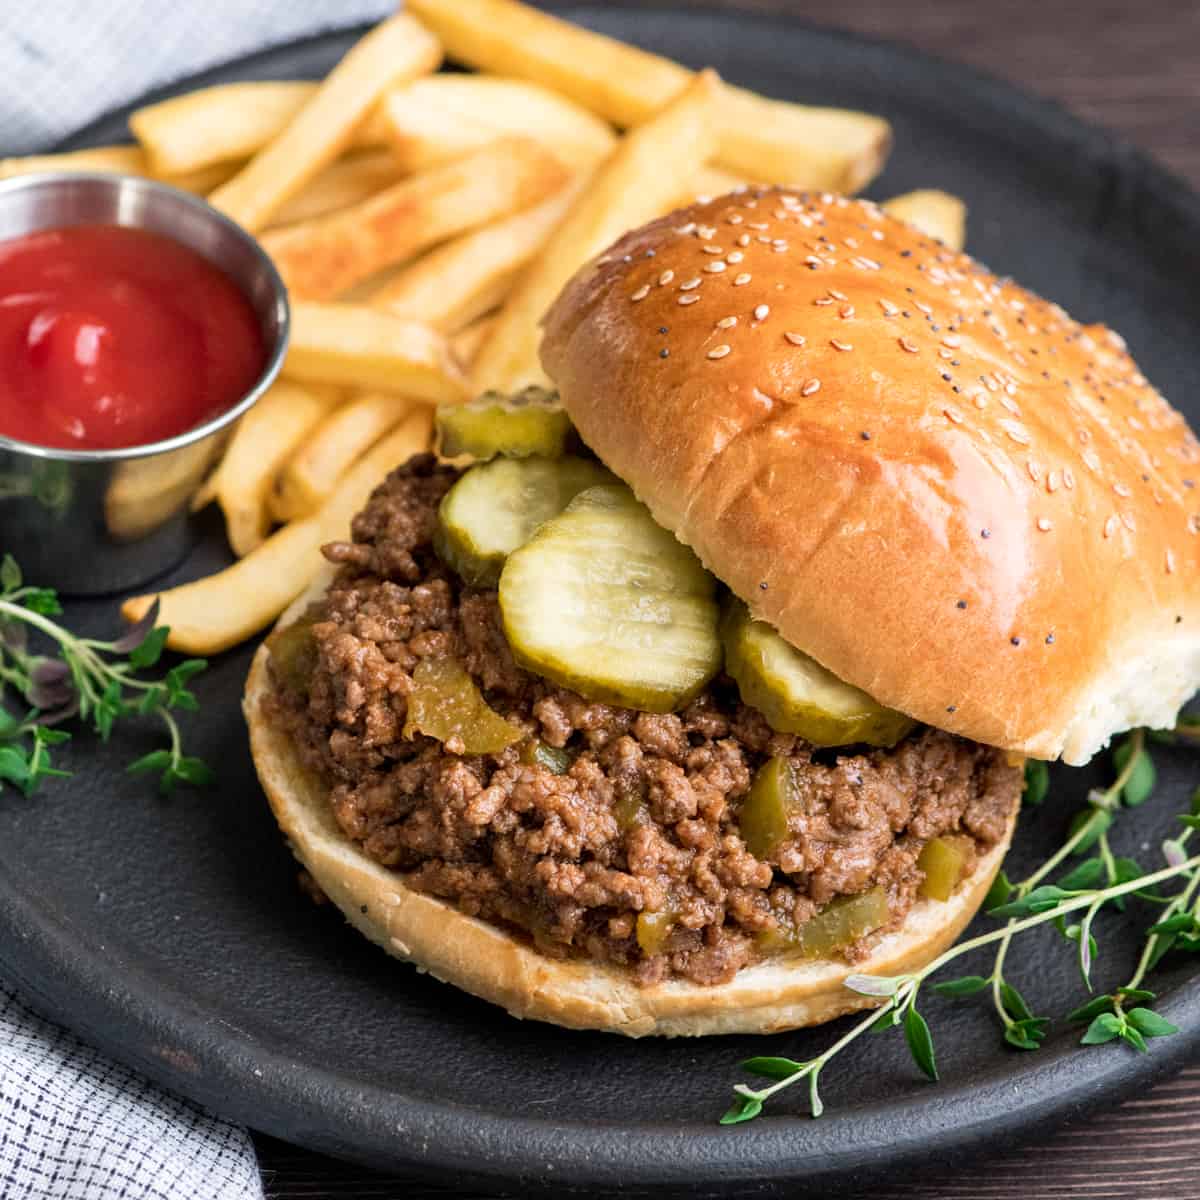 healthy sloppy joes recipe on a bun with pickles on a round black plate with ketchup and french fries and fresh thyme